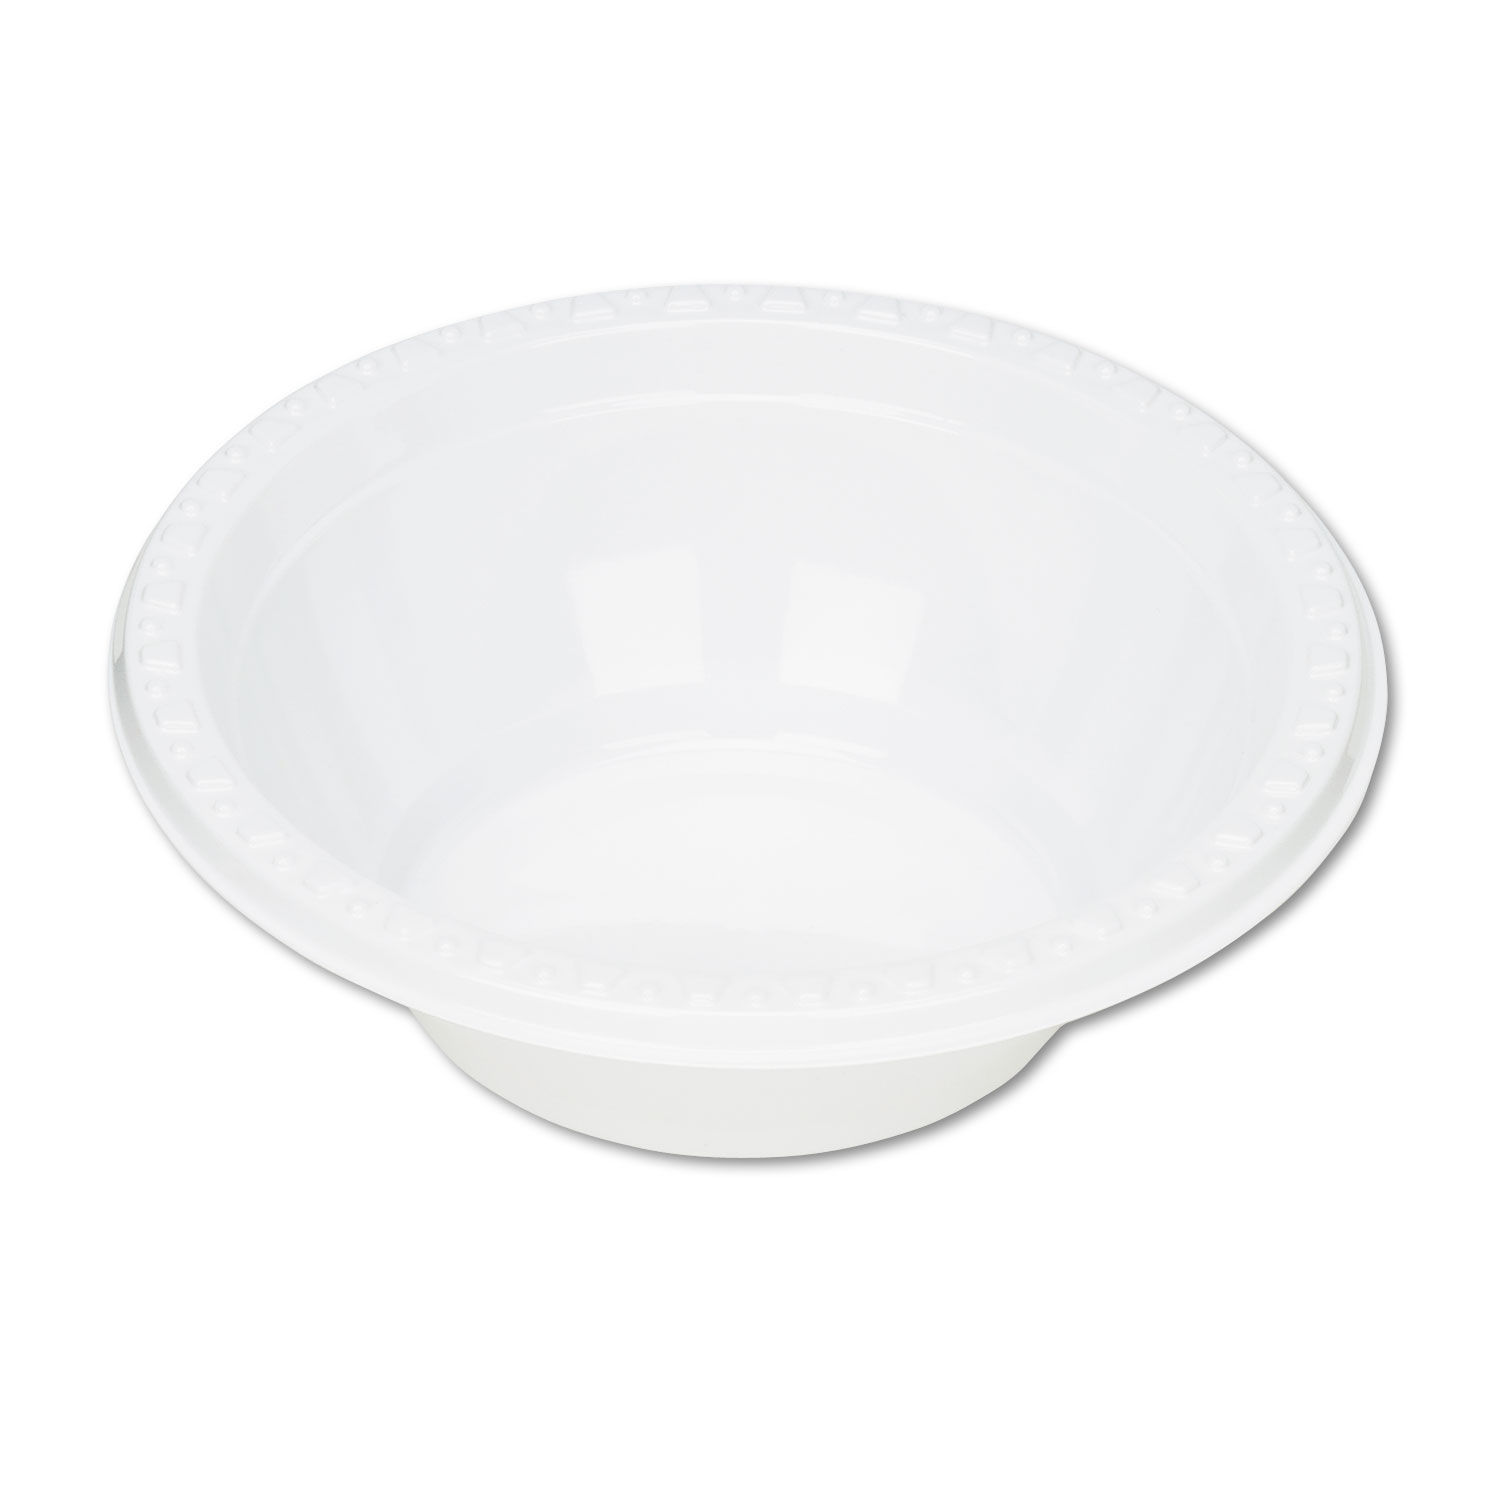 Tablemate Plastic Dinnerware Bowls 5 oz. White 125/Pack